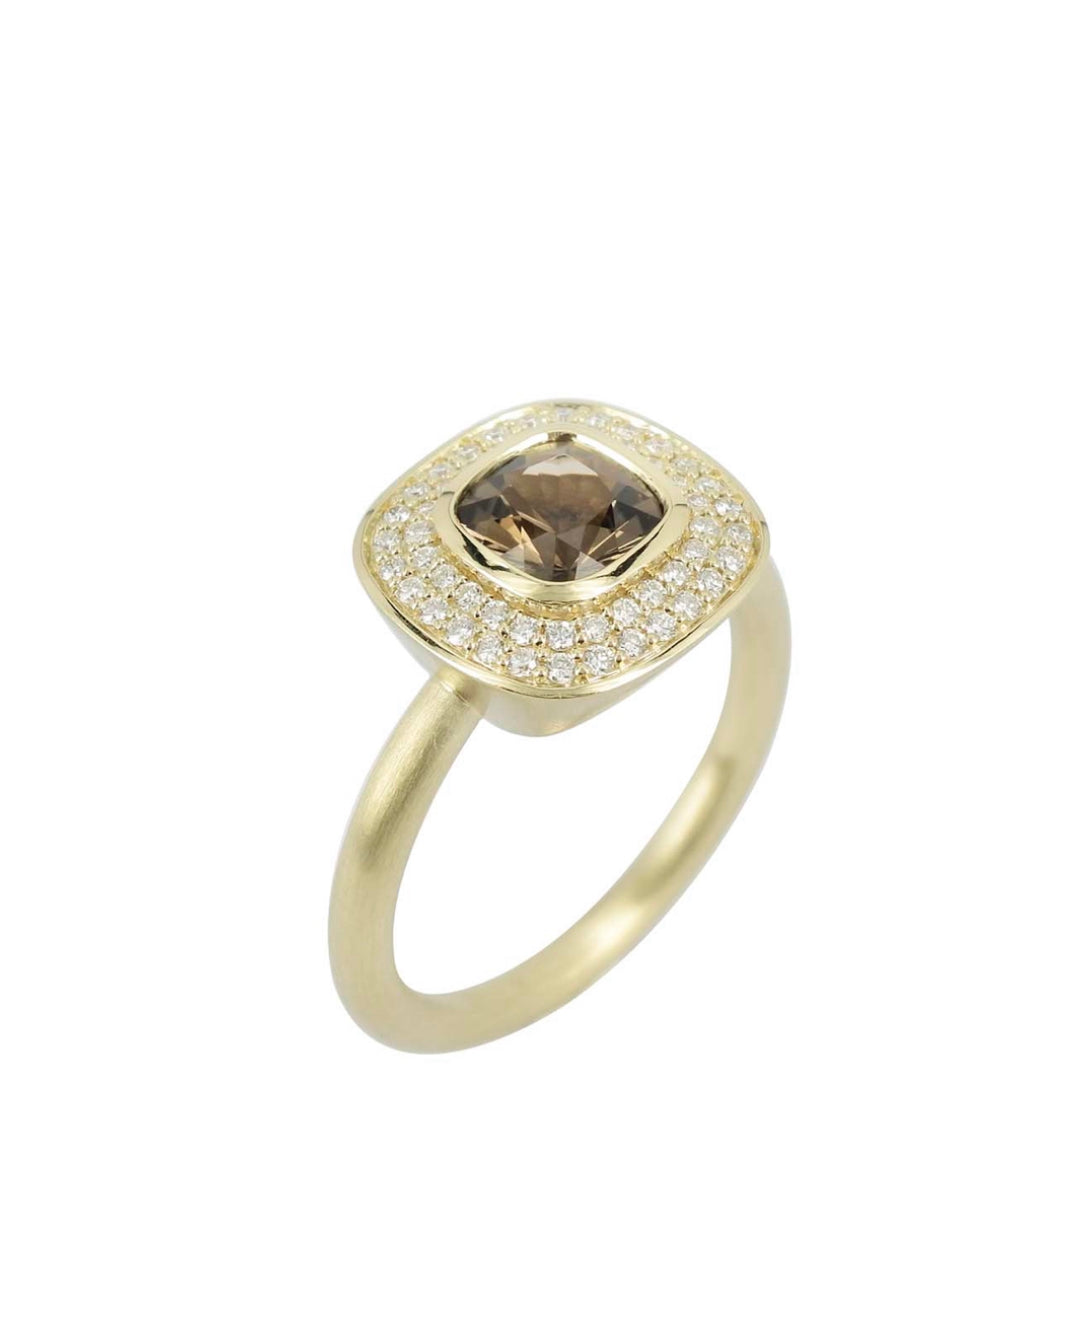 This beauty is made of solid gold with 52 sparkling vintage diamonds, and one smokey quartz. As our crown it will only be produced in 20 items. Each ring will be engraved with an unique number. Two rings is already sold. 